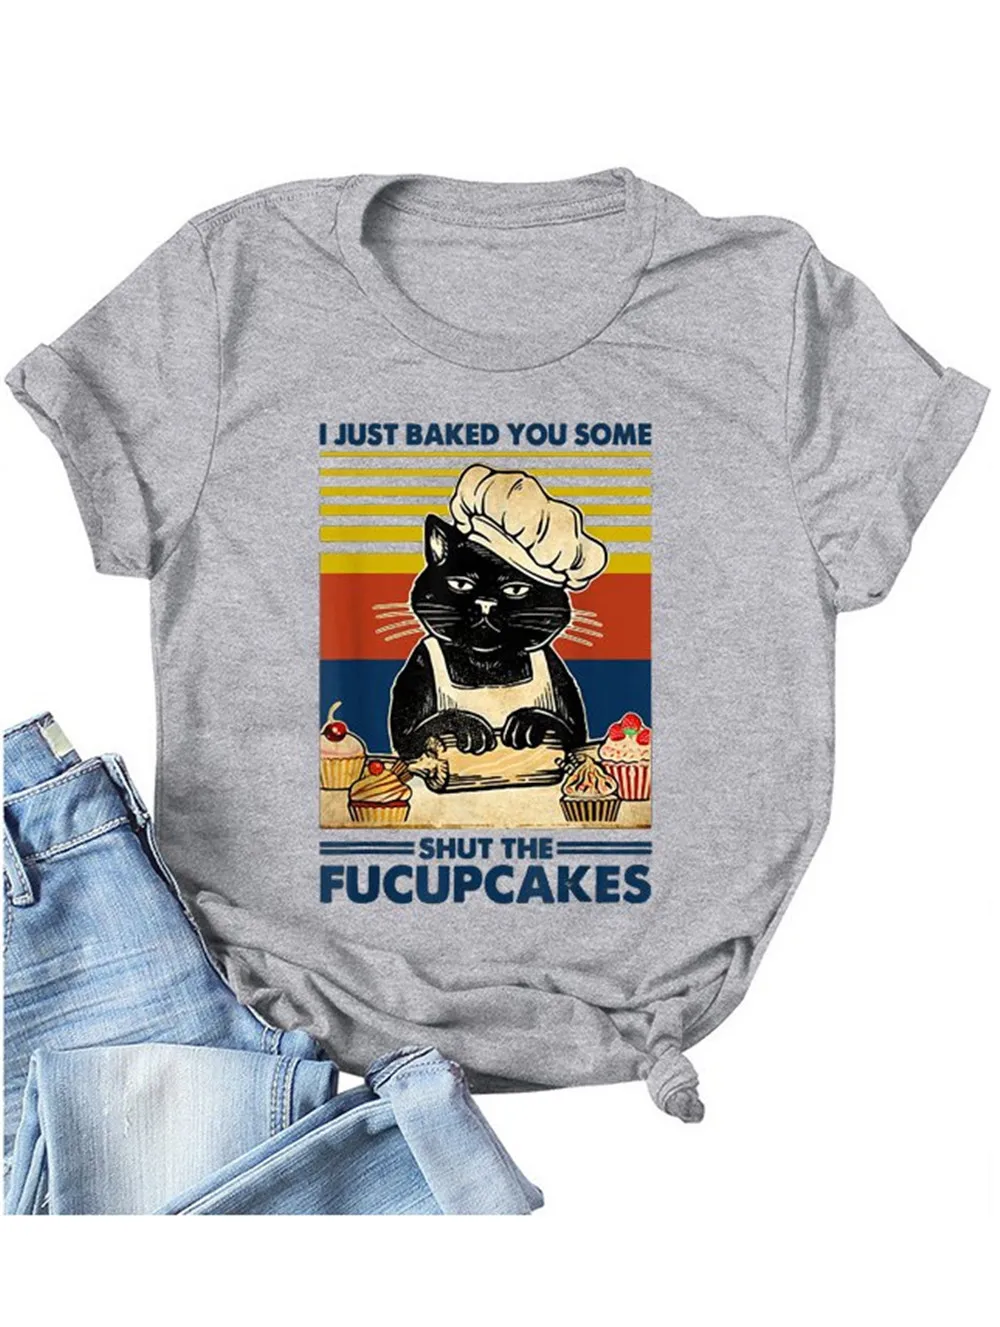 Vintage Cat Housewife T Shirt Women I Just Baked You Some Shut The Fucupcakes Print Short Sleeve Summer Tshirts Novelty Tops Te